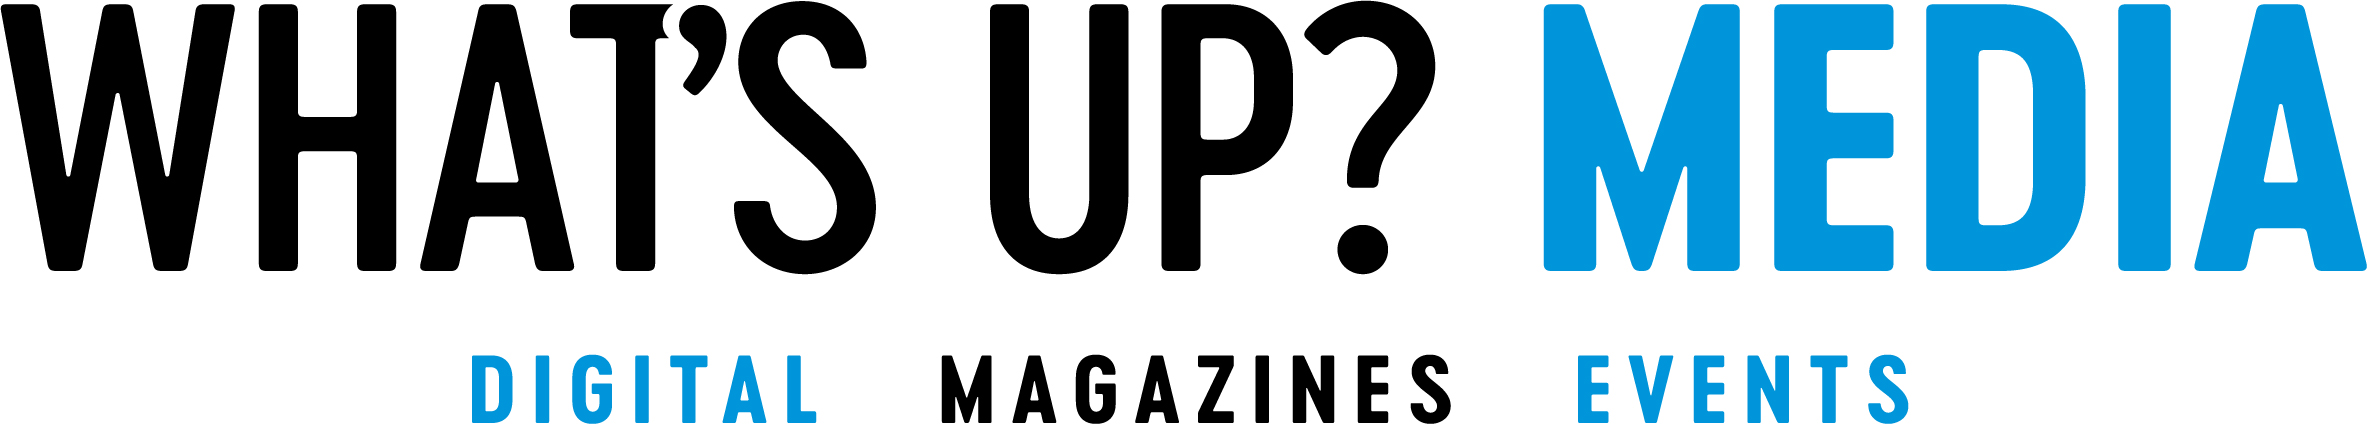 What's Up? Media. Digital, Magazines, Events